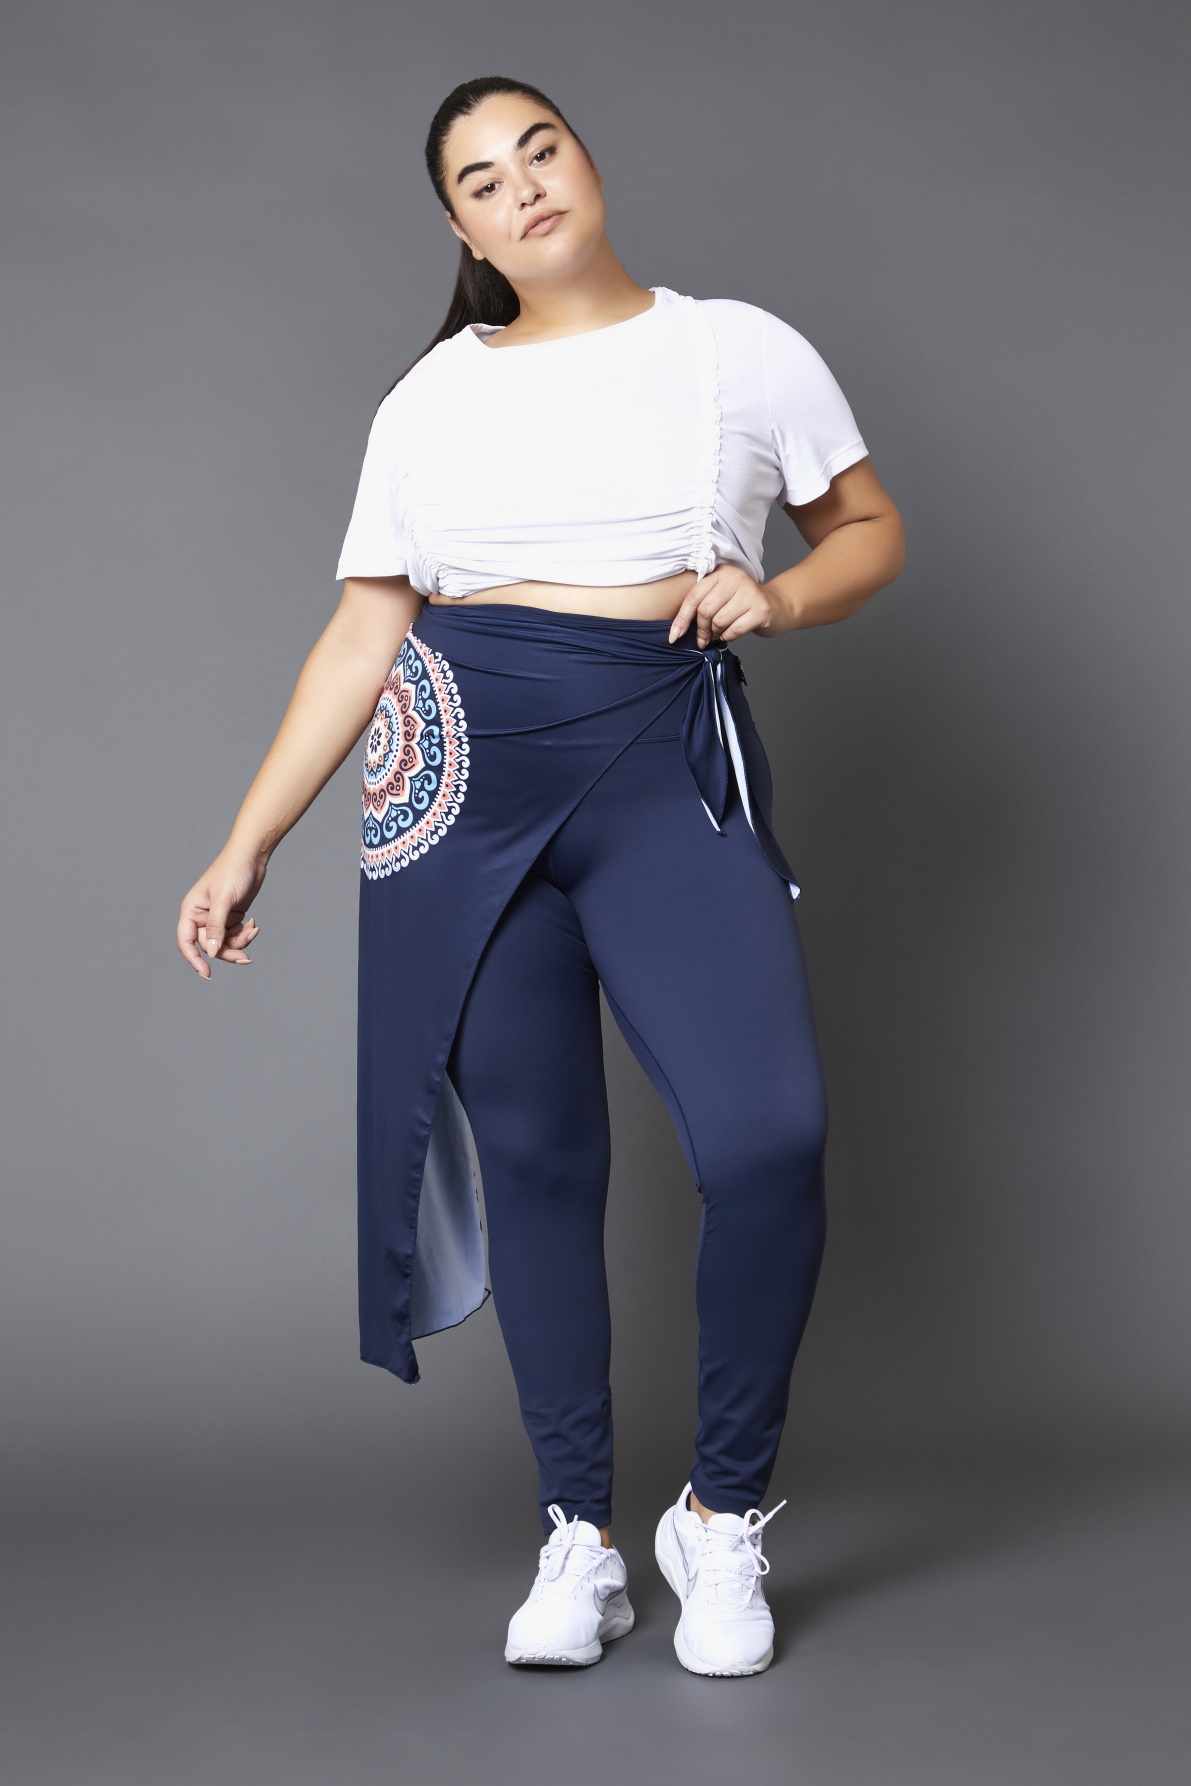 It's A Wrap - High Waist Leggings With Attached Skirt